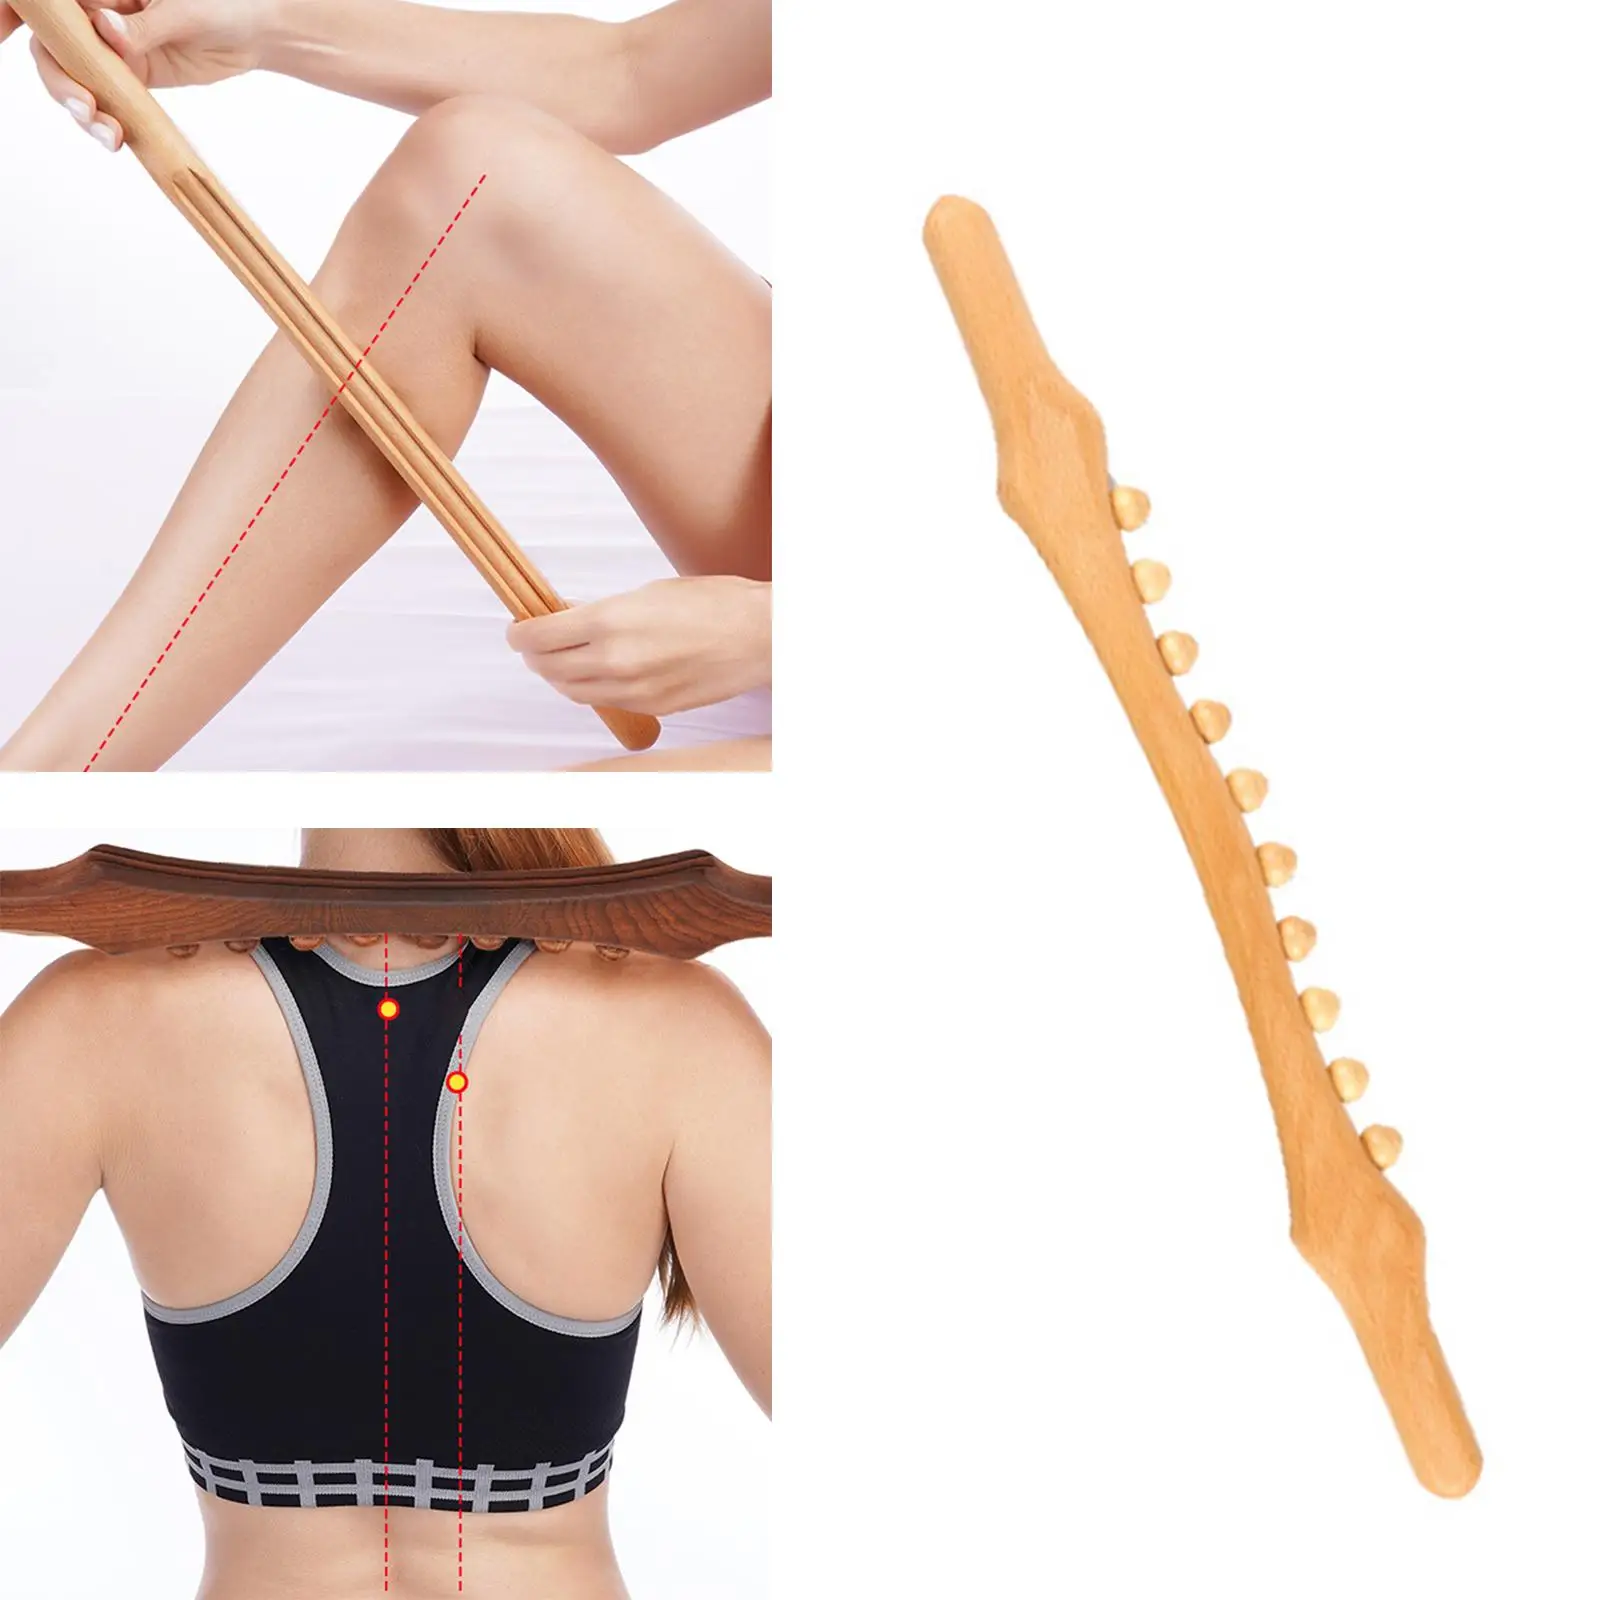 Wooden Gua Sha Scraping Massage Tool 10 Beads Acupuncture Massager Relieve Sore Muscles Massager Body Meridian for Neck Waist